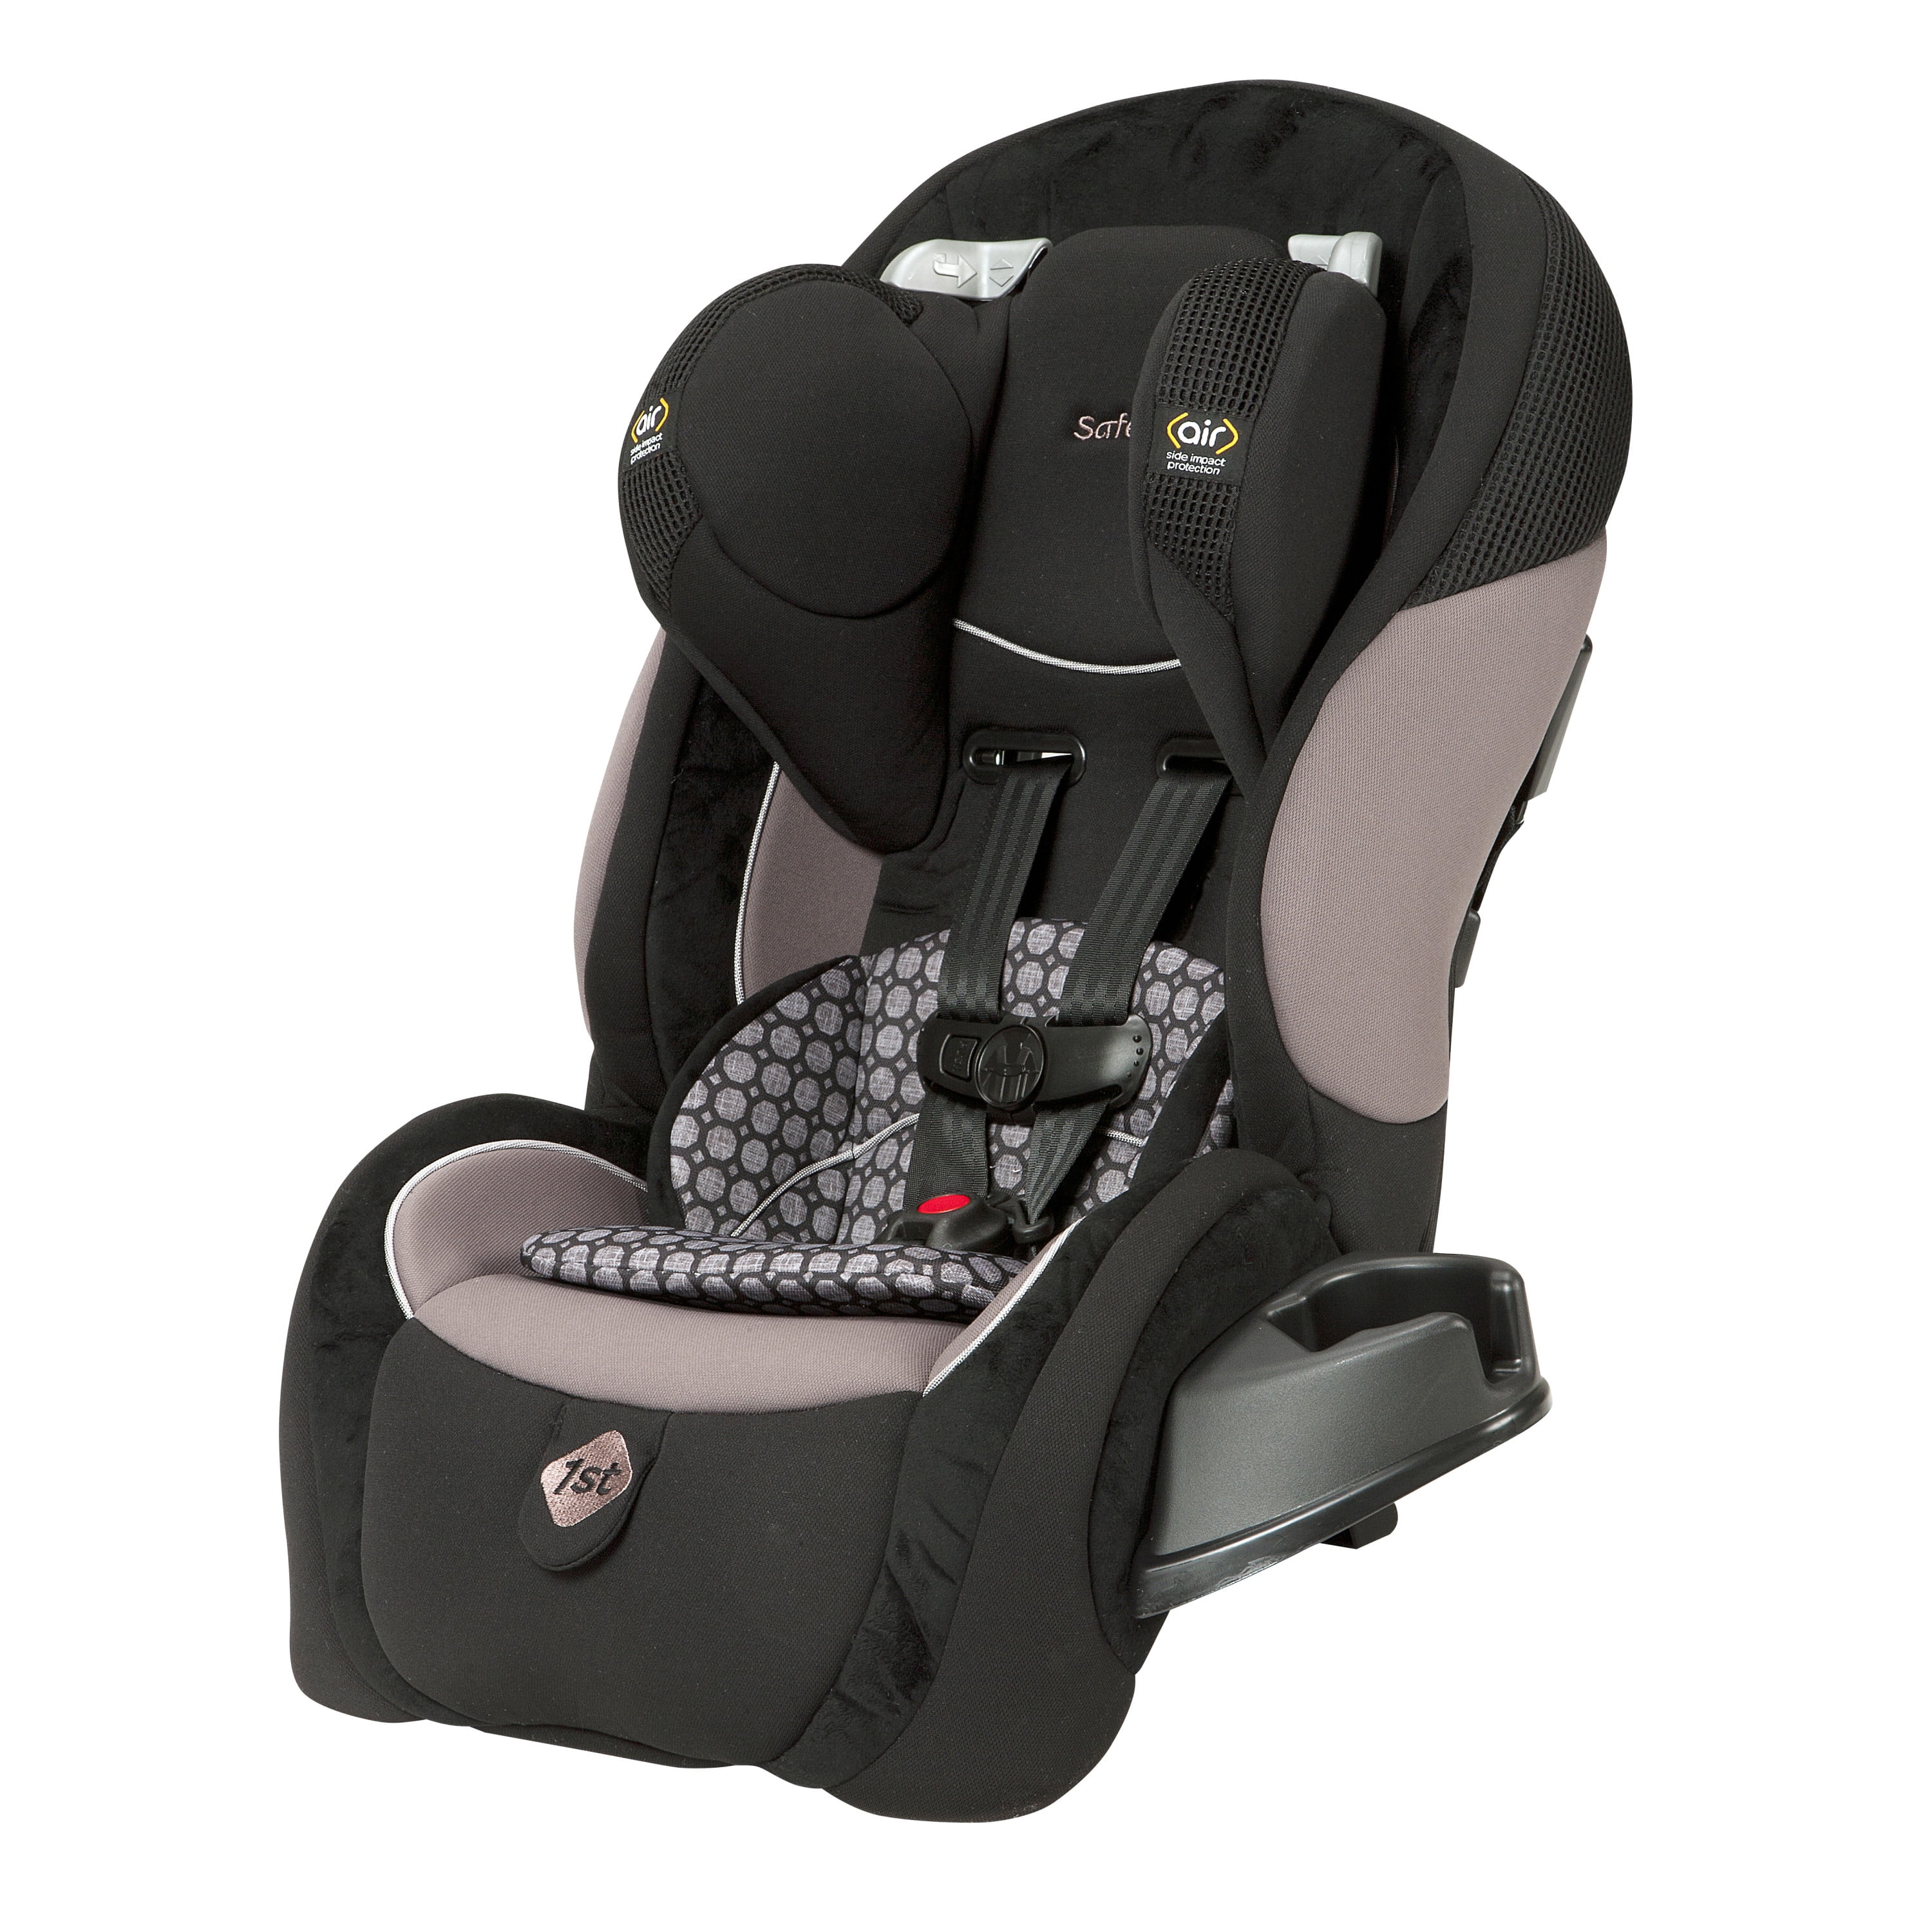  Safety 1st Complete Air 65 Convertible Car Seat Callahan 